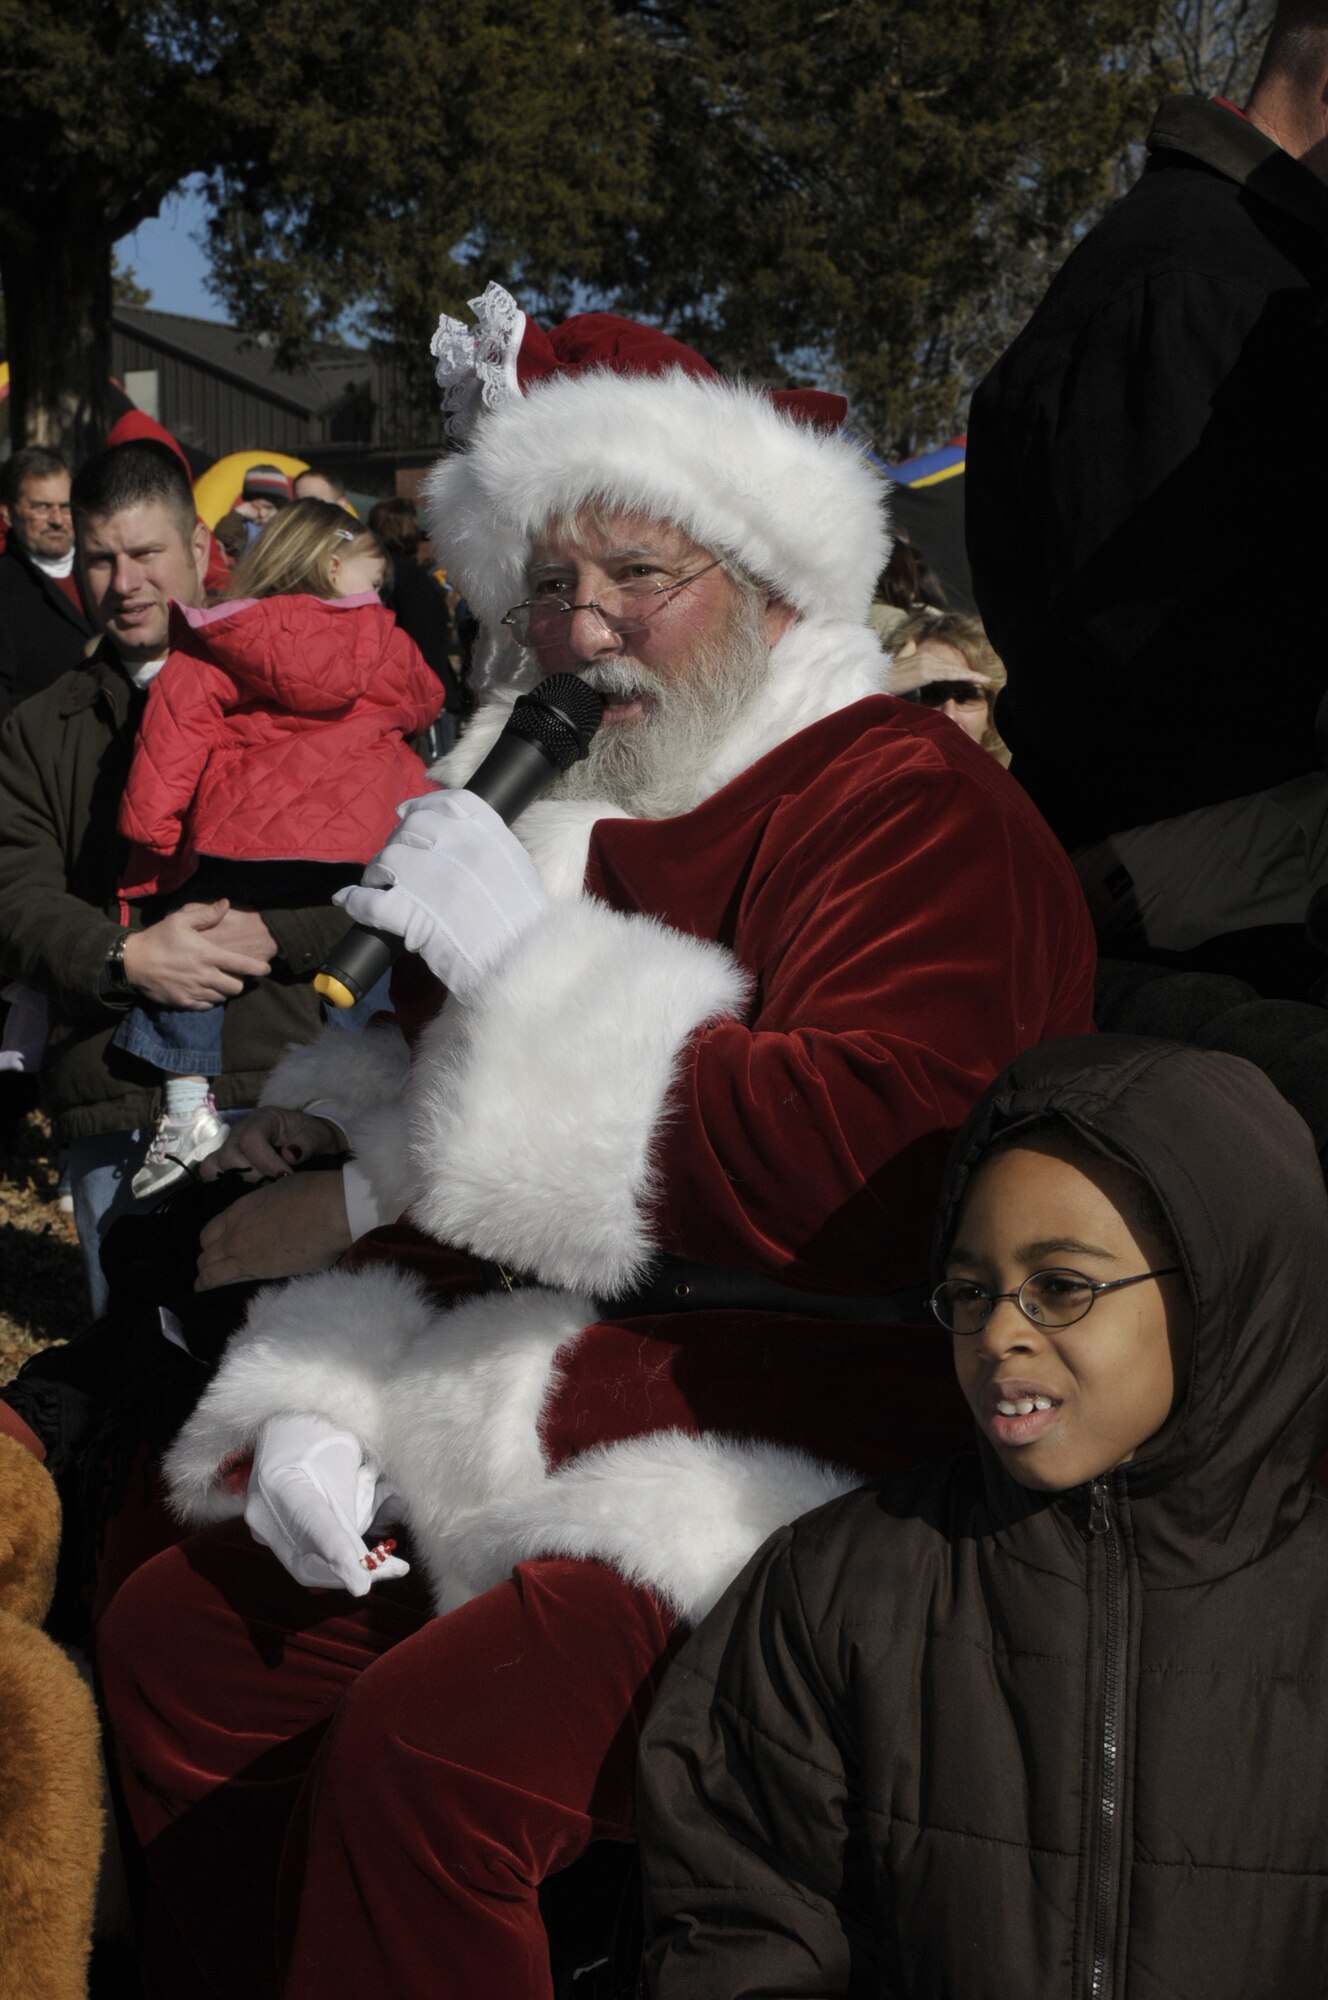 Santa makes his way to the Arnold Lakeside Club to host the annual Children’s Christmas Party Dec. 7. (Photo by Rick Goodfriend)